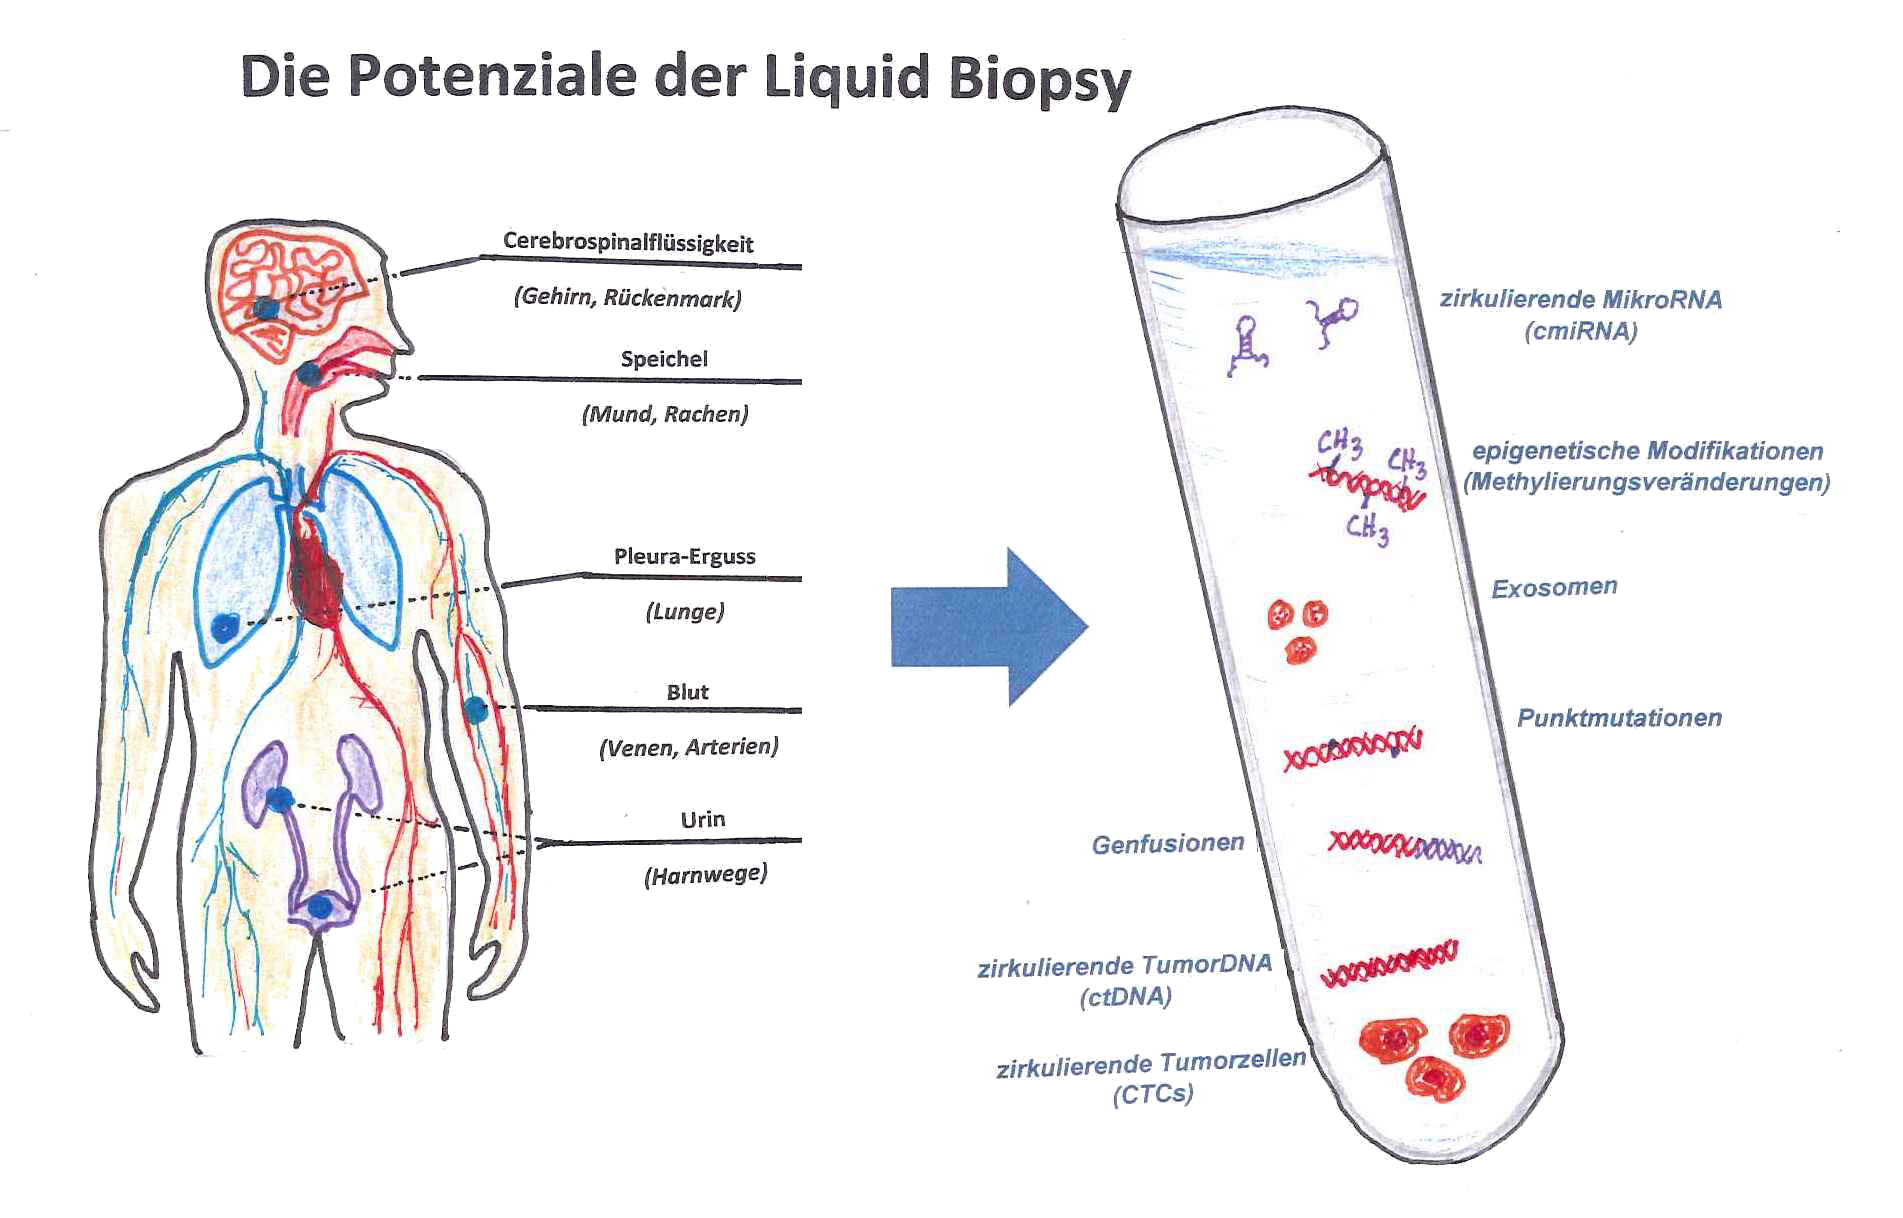 Liquid biopsy, sources and structures for the analysis